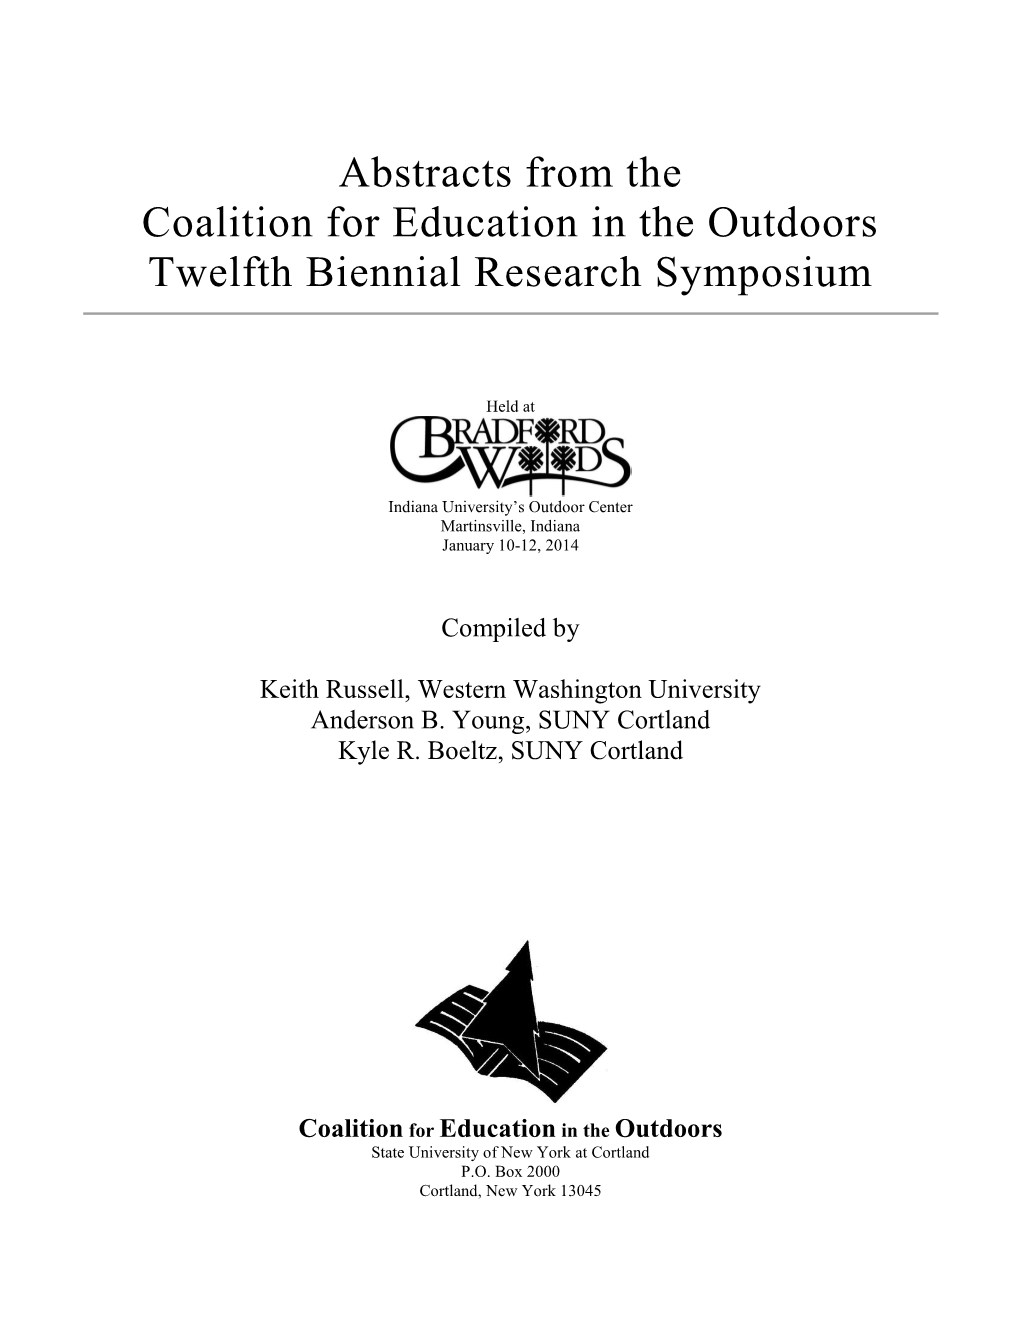 Abstracts from the Coalition for Education in the Outdoors Twelfth